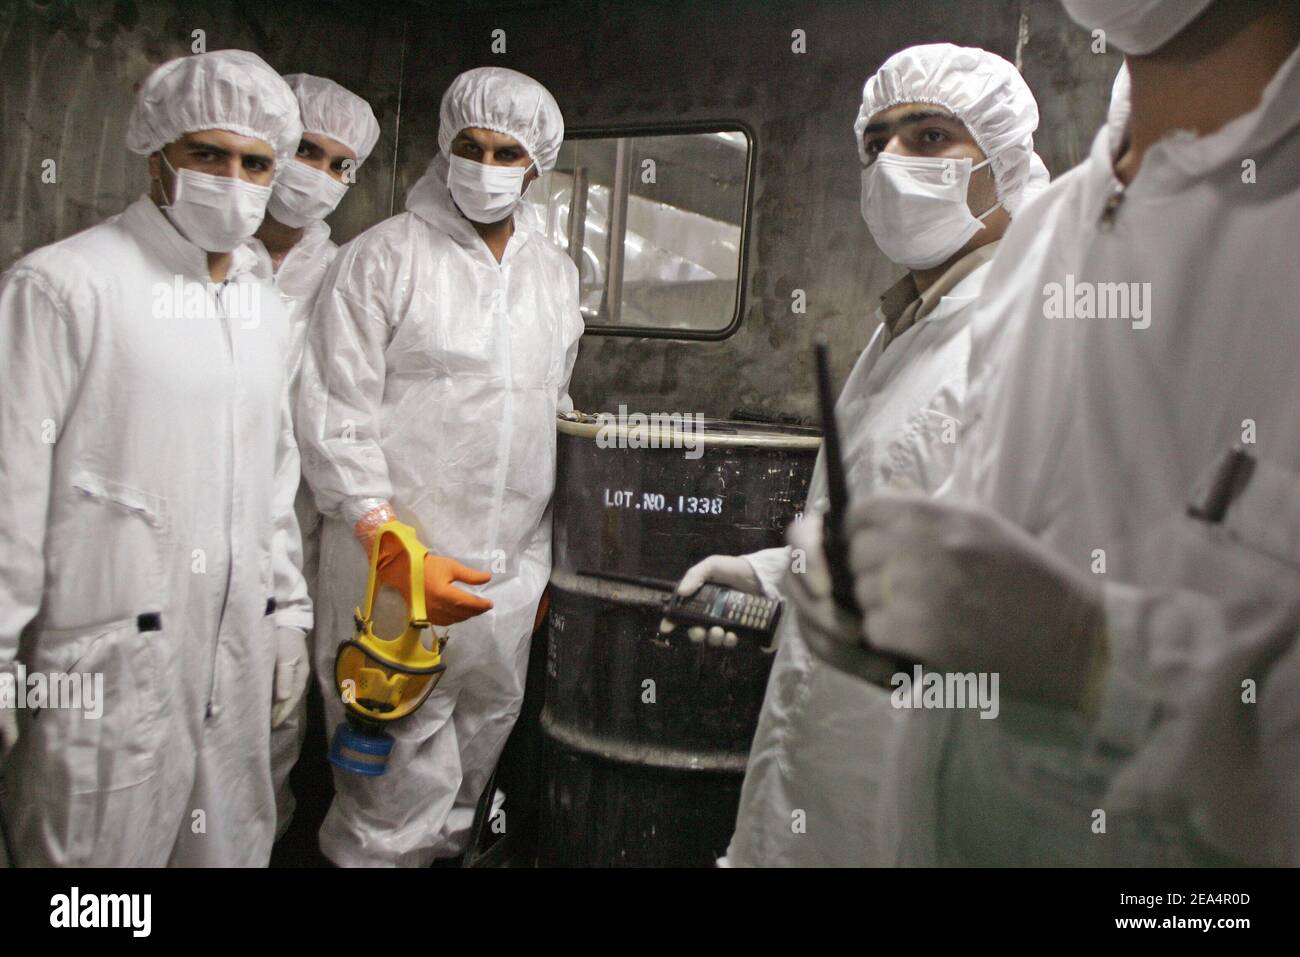 Iranian technicians remove a container of radioactive uranium, 'yellow cake', sealed by the International Atomic Energy Agency, to be used at the Isfahan Uranium Conversion Facilities (UCF), 420 kms south of Tehran, Iran, on August 8, 2005. Iran looked set to resume sensitive nuclear fuel work imminently after the arrival of UN inspectors at a uranium conversion plant. Photo by ABACAPRESS.COM. Stock Photo